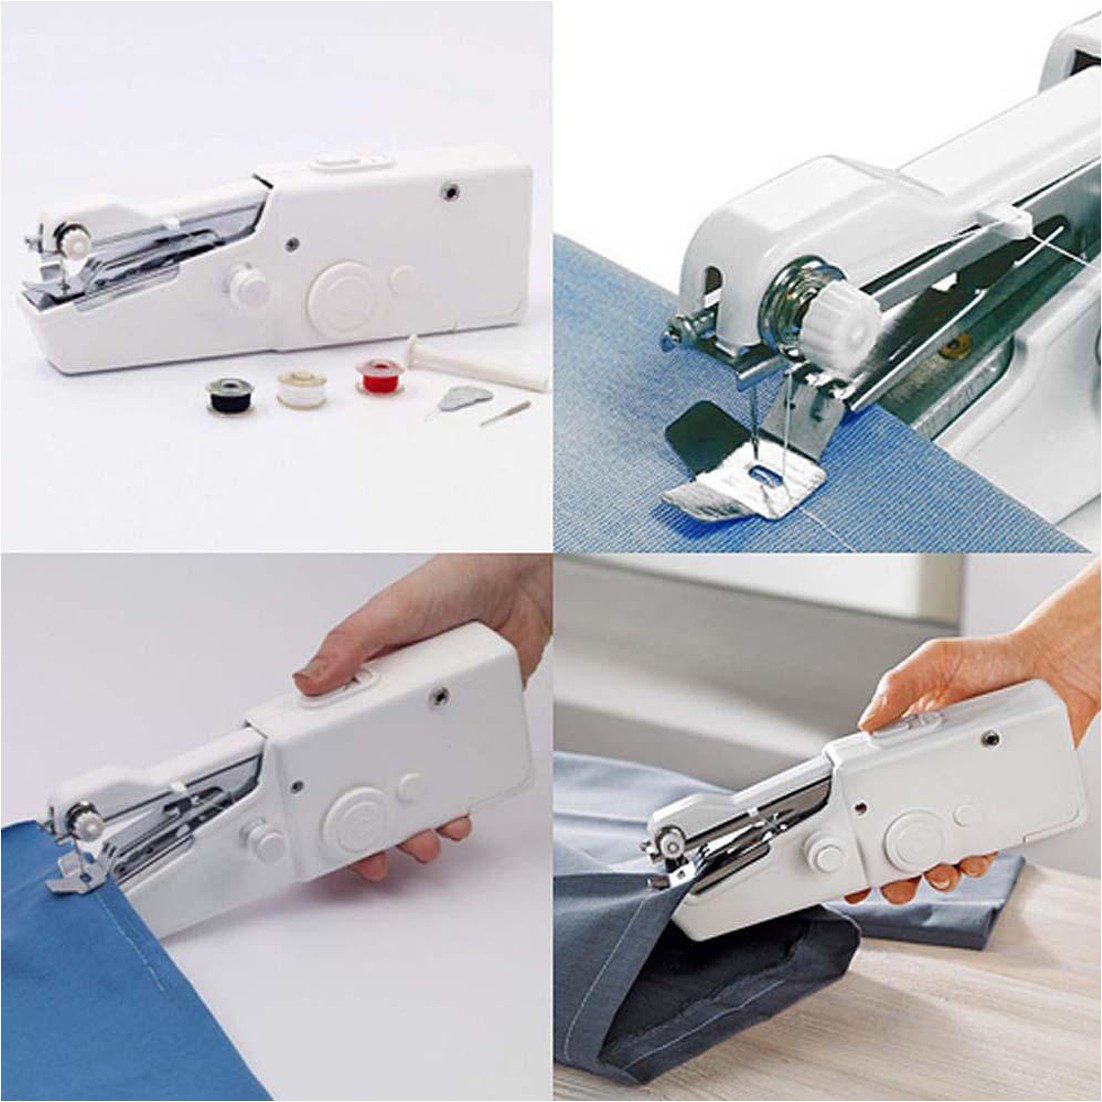 Handheld Portable Mini Sewing Machine - Battery Operated